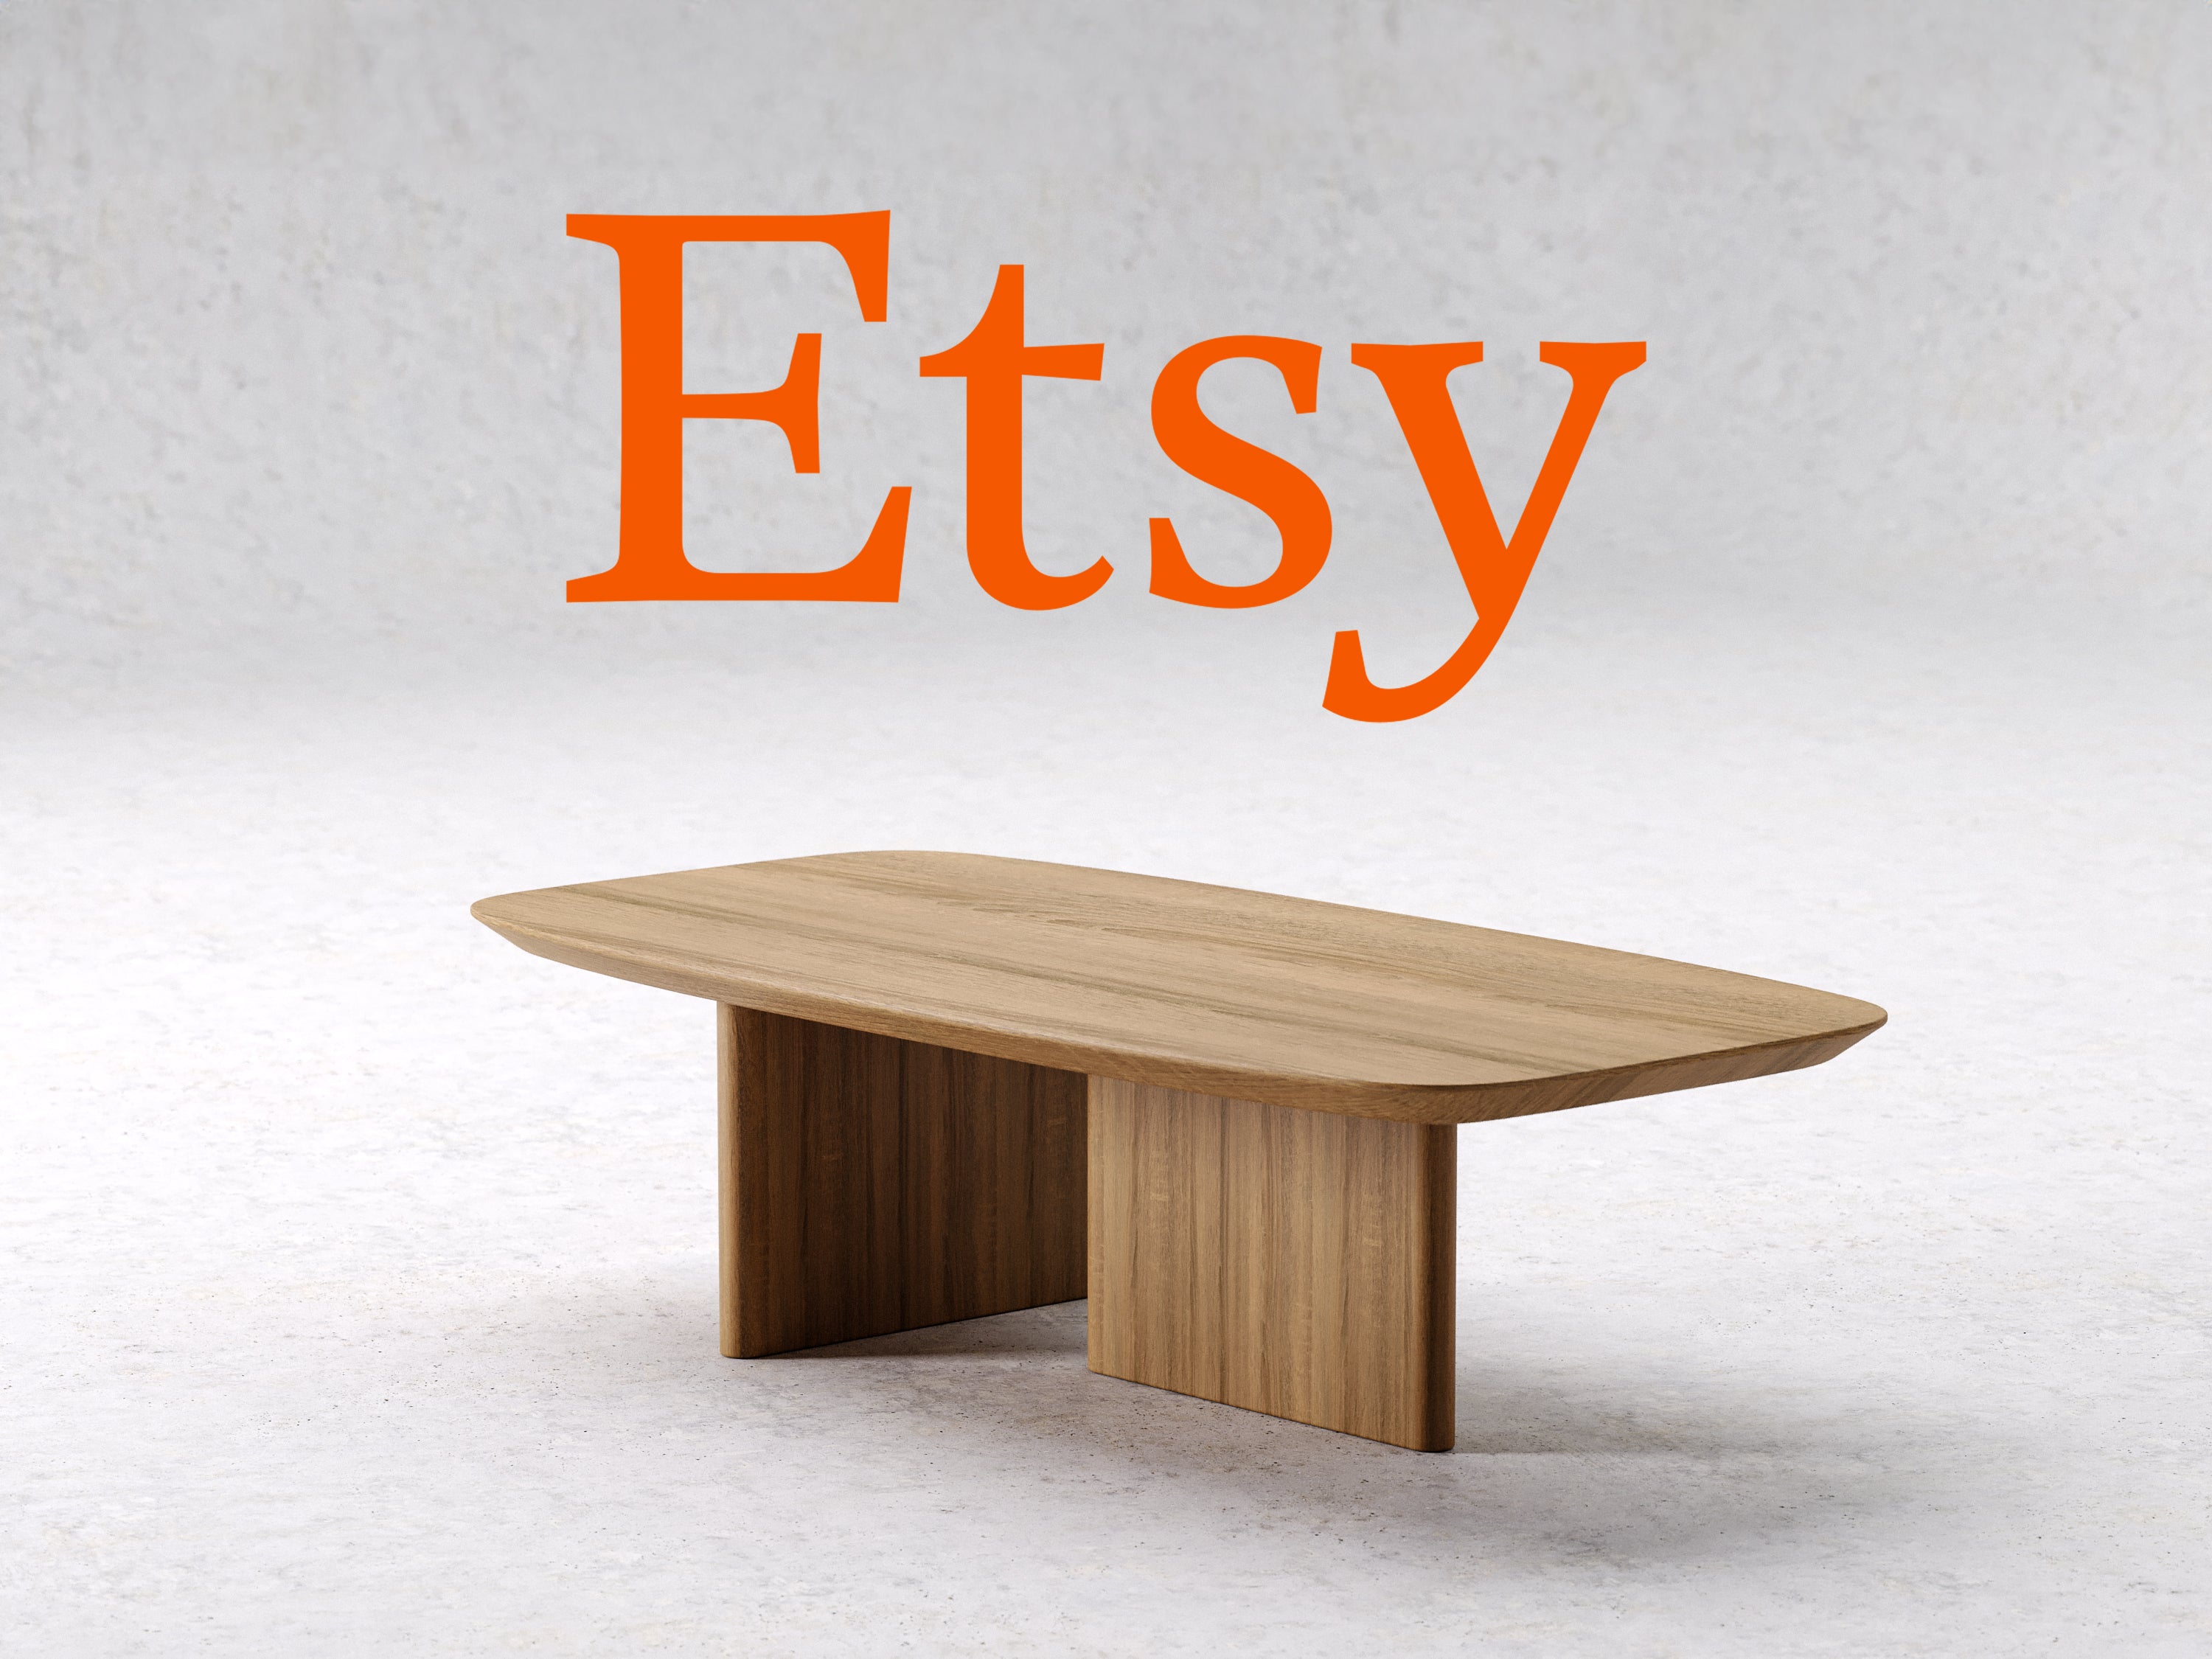 Trust in Design: our reputation on Etsy